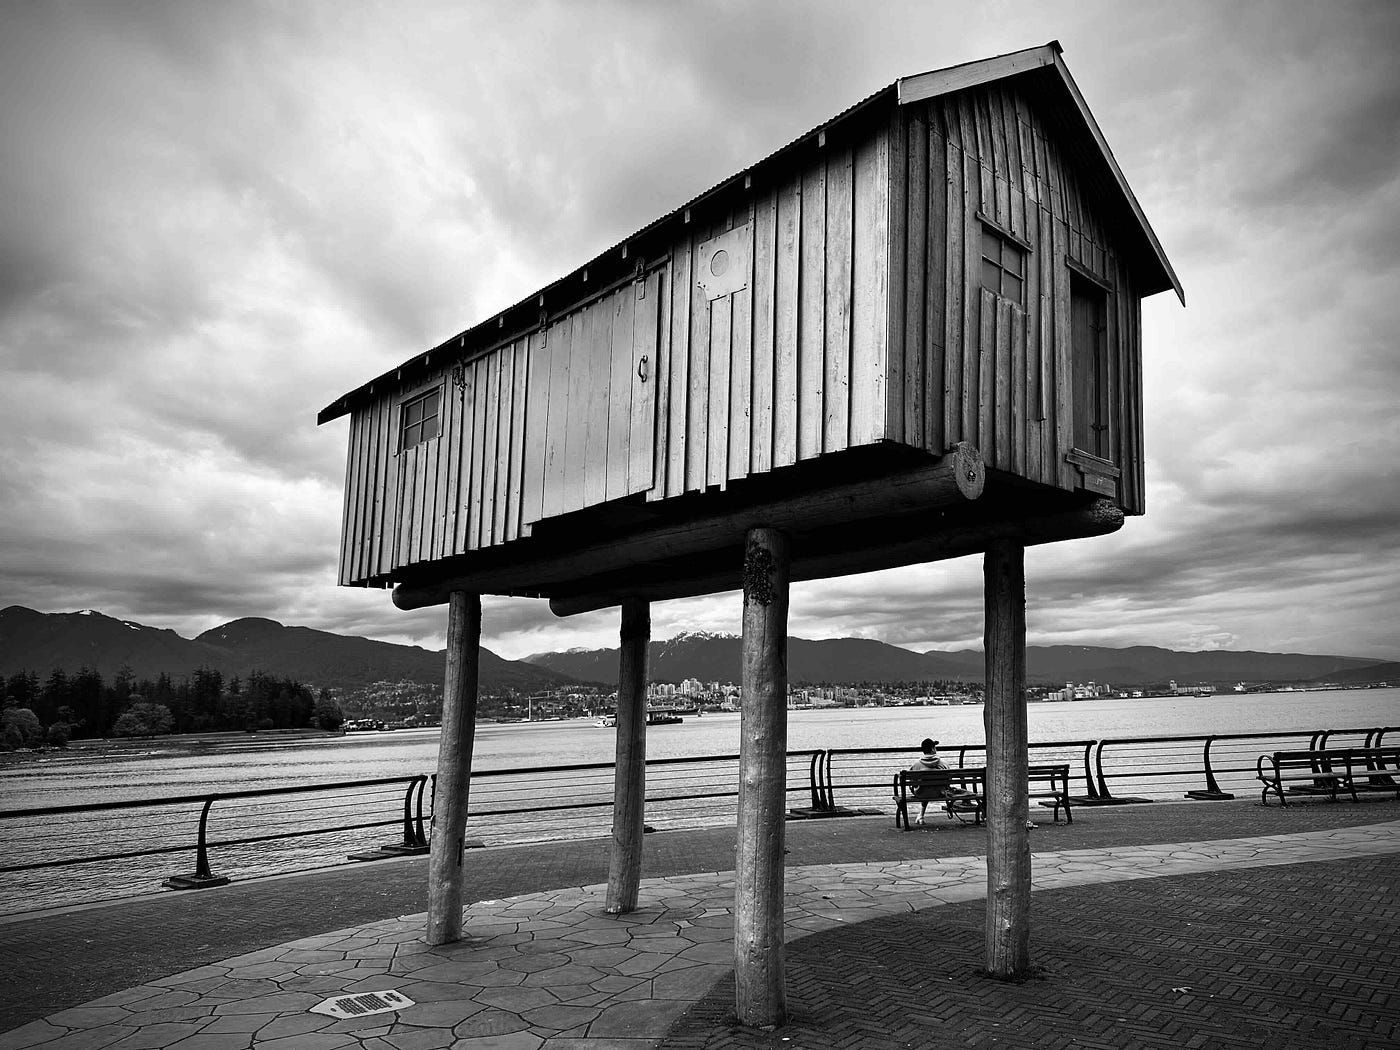 House on stilts against mountain and ocean backdrop. Black and white photograph.